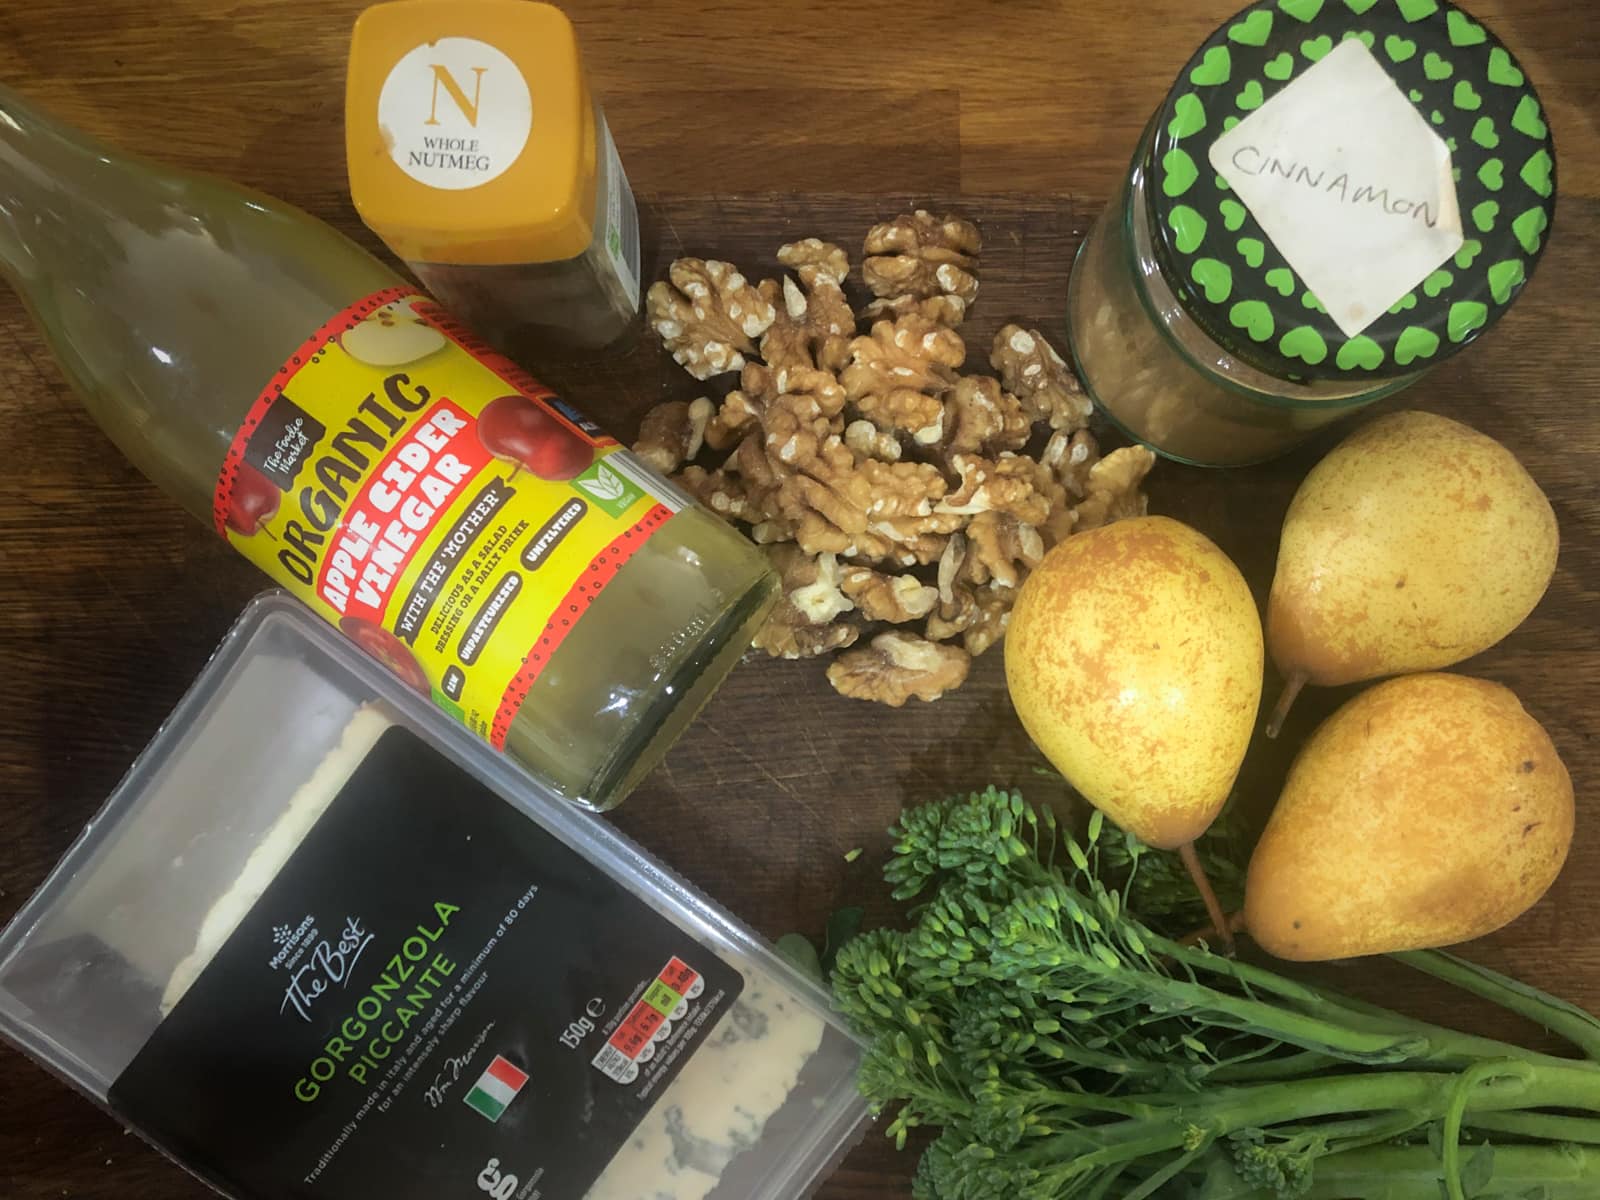 Ingredients for a pear and broccoli salad, including cider vinegar, blue cheese, walnuts, pears and broccoli and spices.